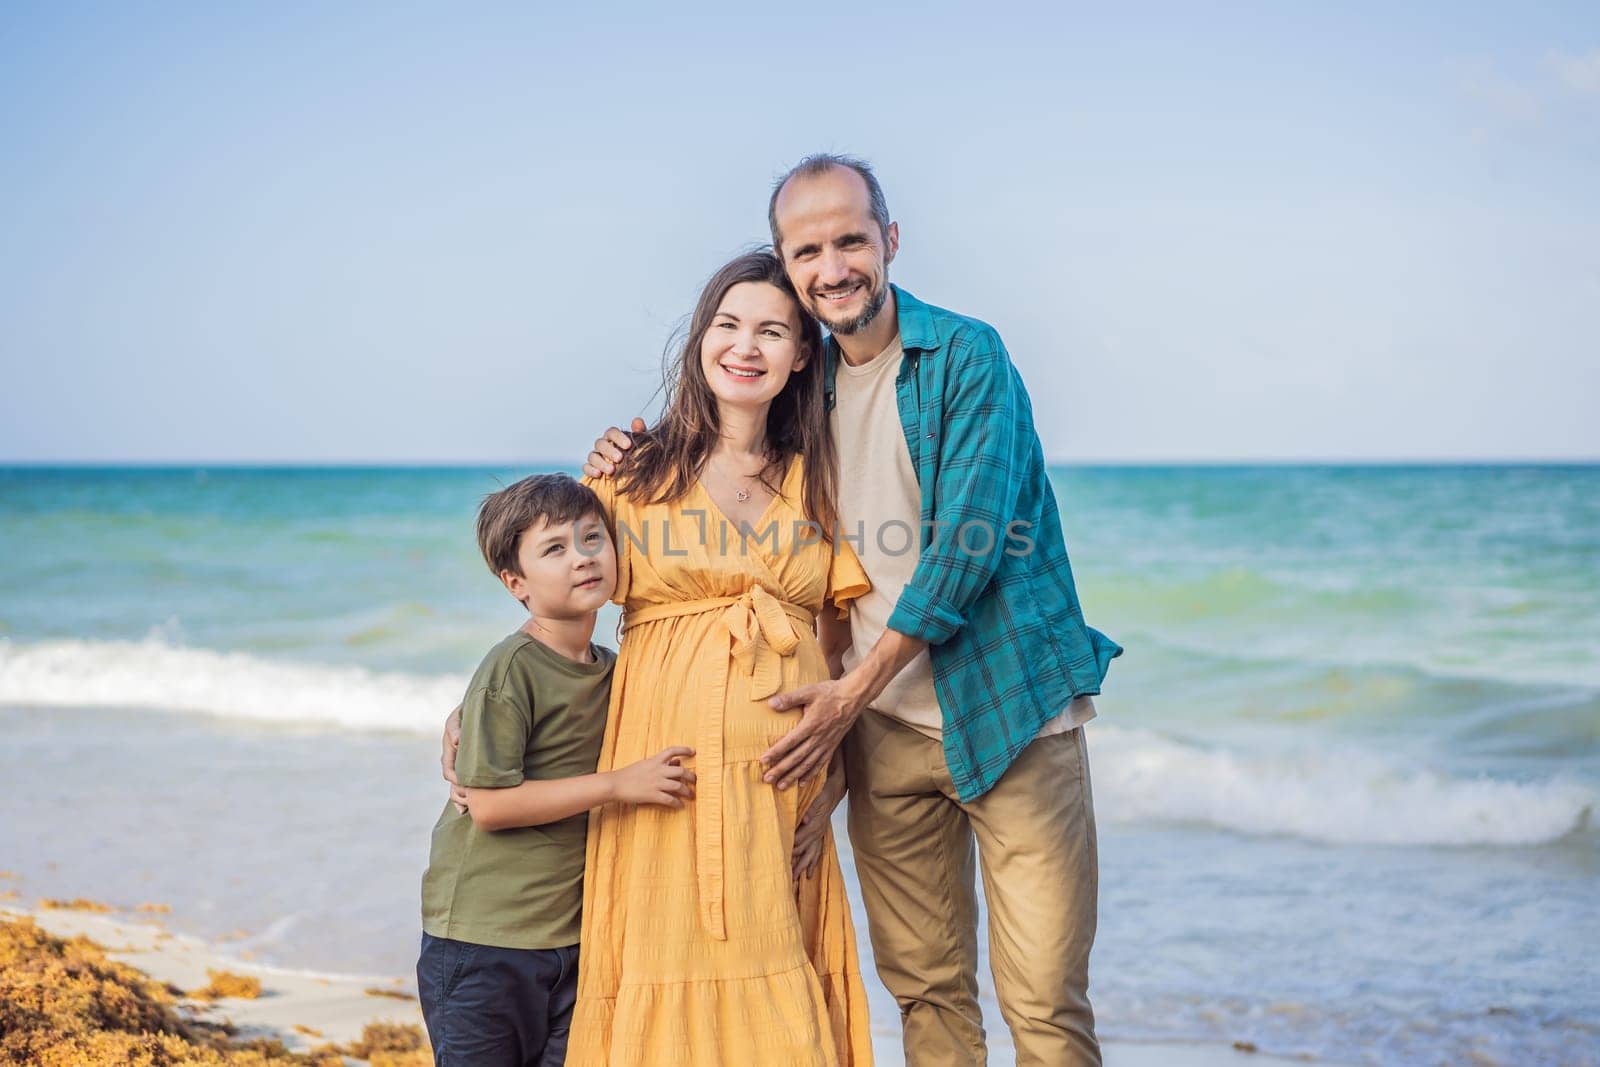 A loving family enjoying tropical beach - a radiant pregnant woman after 40, embraced by her husband, and accompanied by their adult teenage son, savoring precious moments together amidst nature's beauty. Pregnancy after 40 concept.